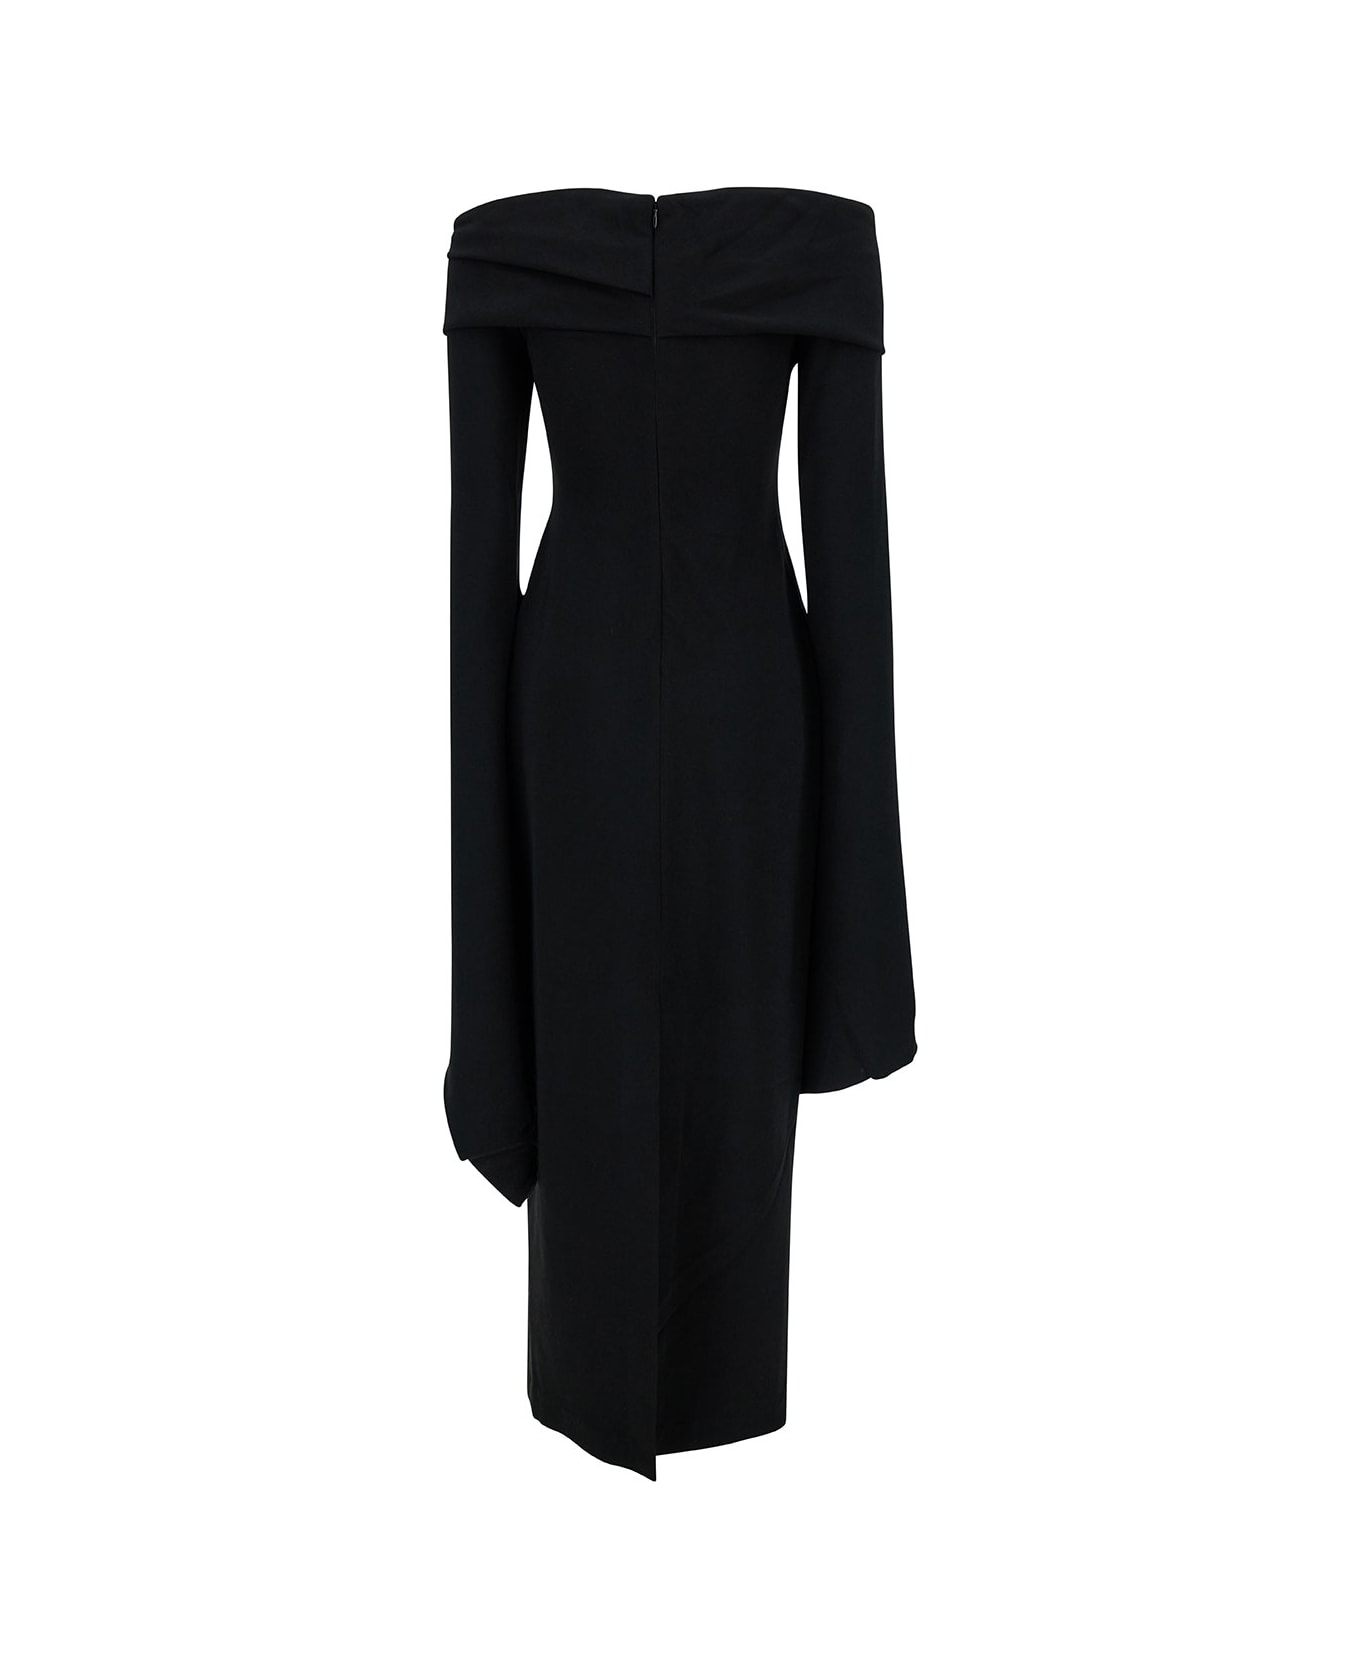 Solace London 'arden' Long Black Dress With Extra Long Dress In Fabric Woman - Black